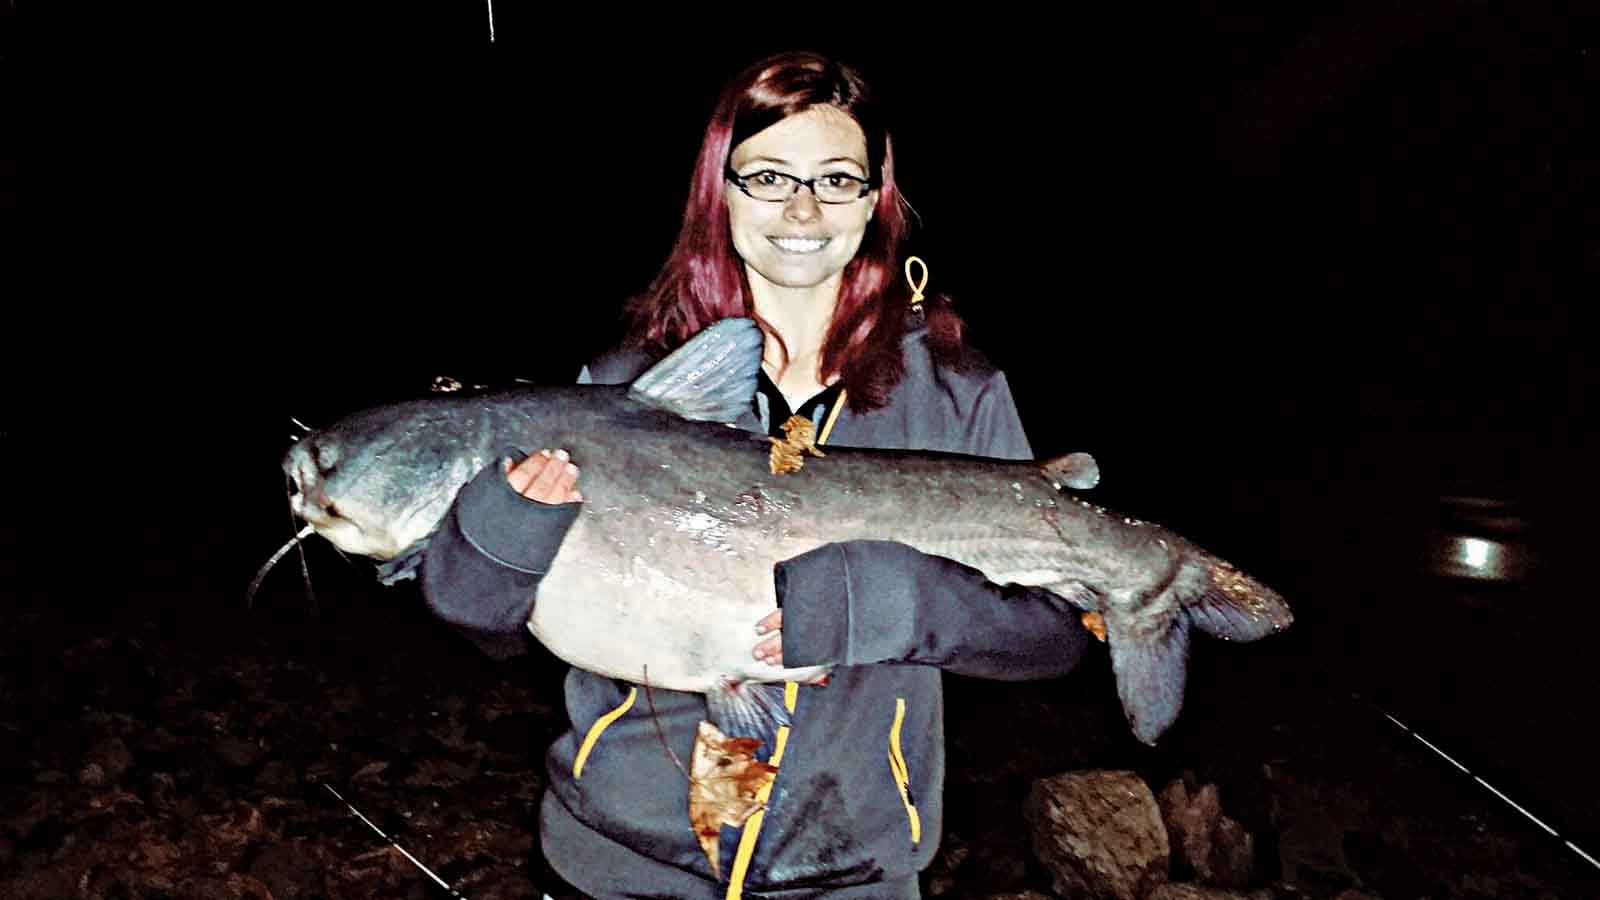 Templets double up on big catfish